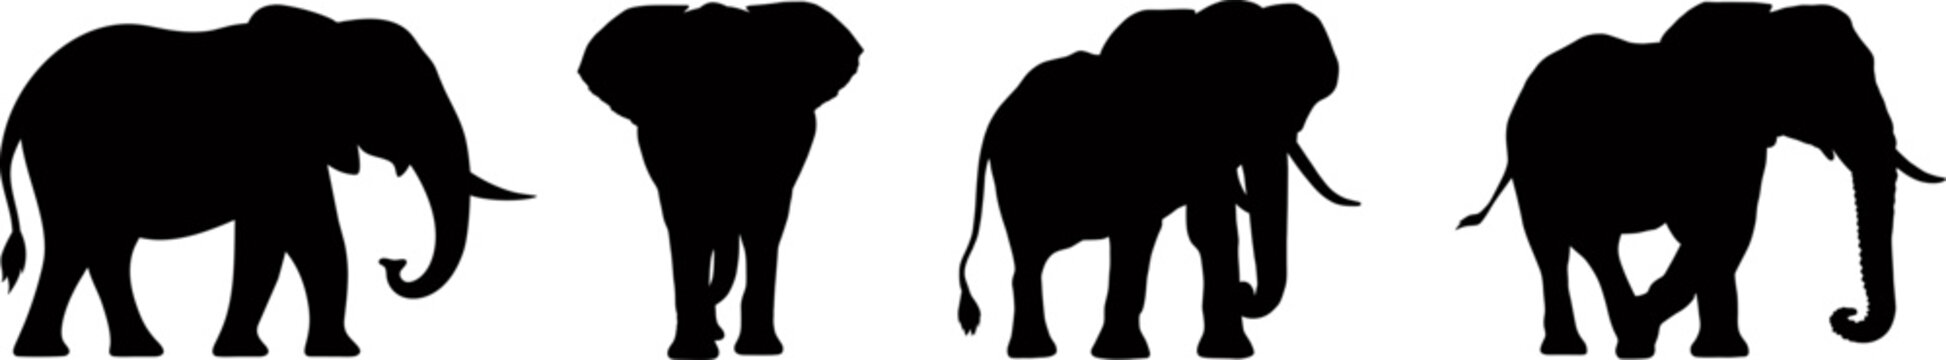 Set of elephant silhouettes in different poses of african elephant or jungle elephant and asian elephant with big ears - vector illustration.